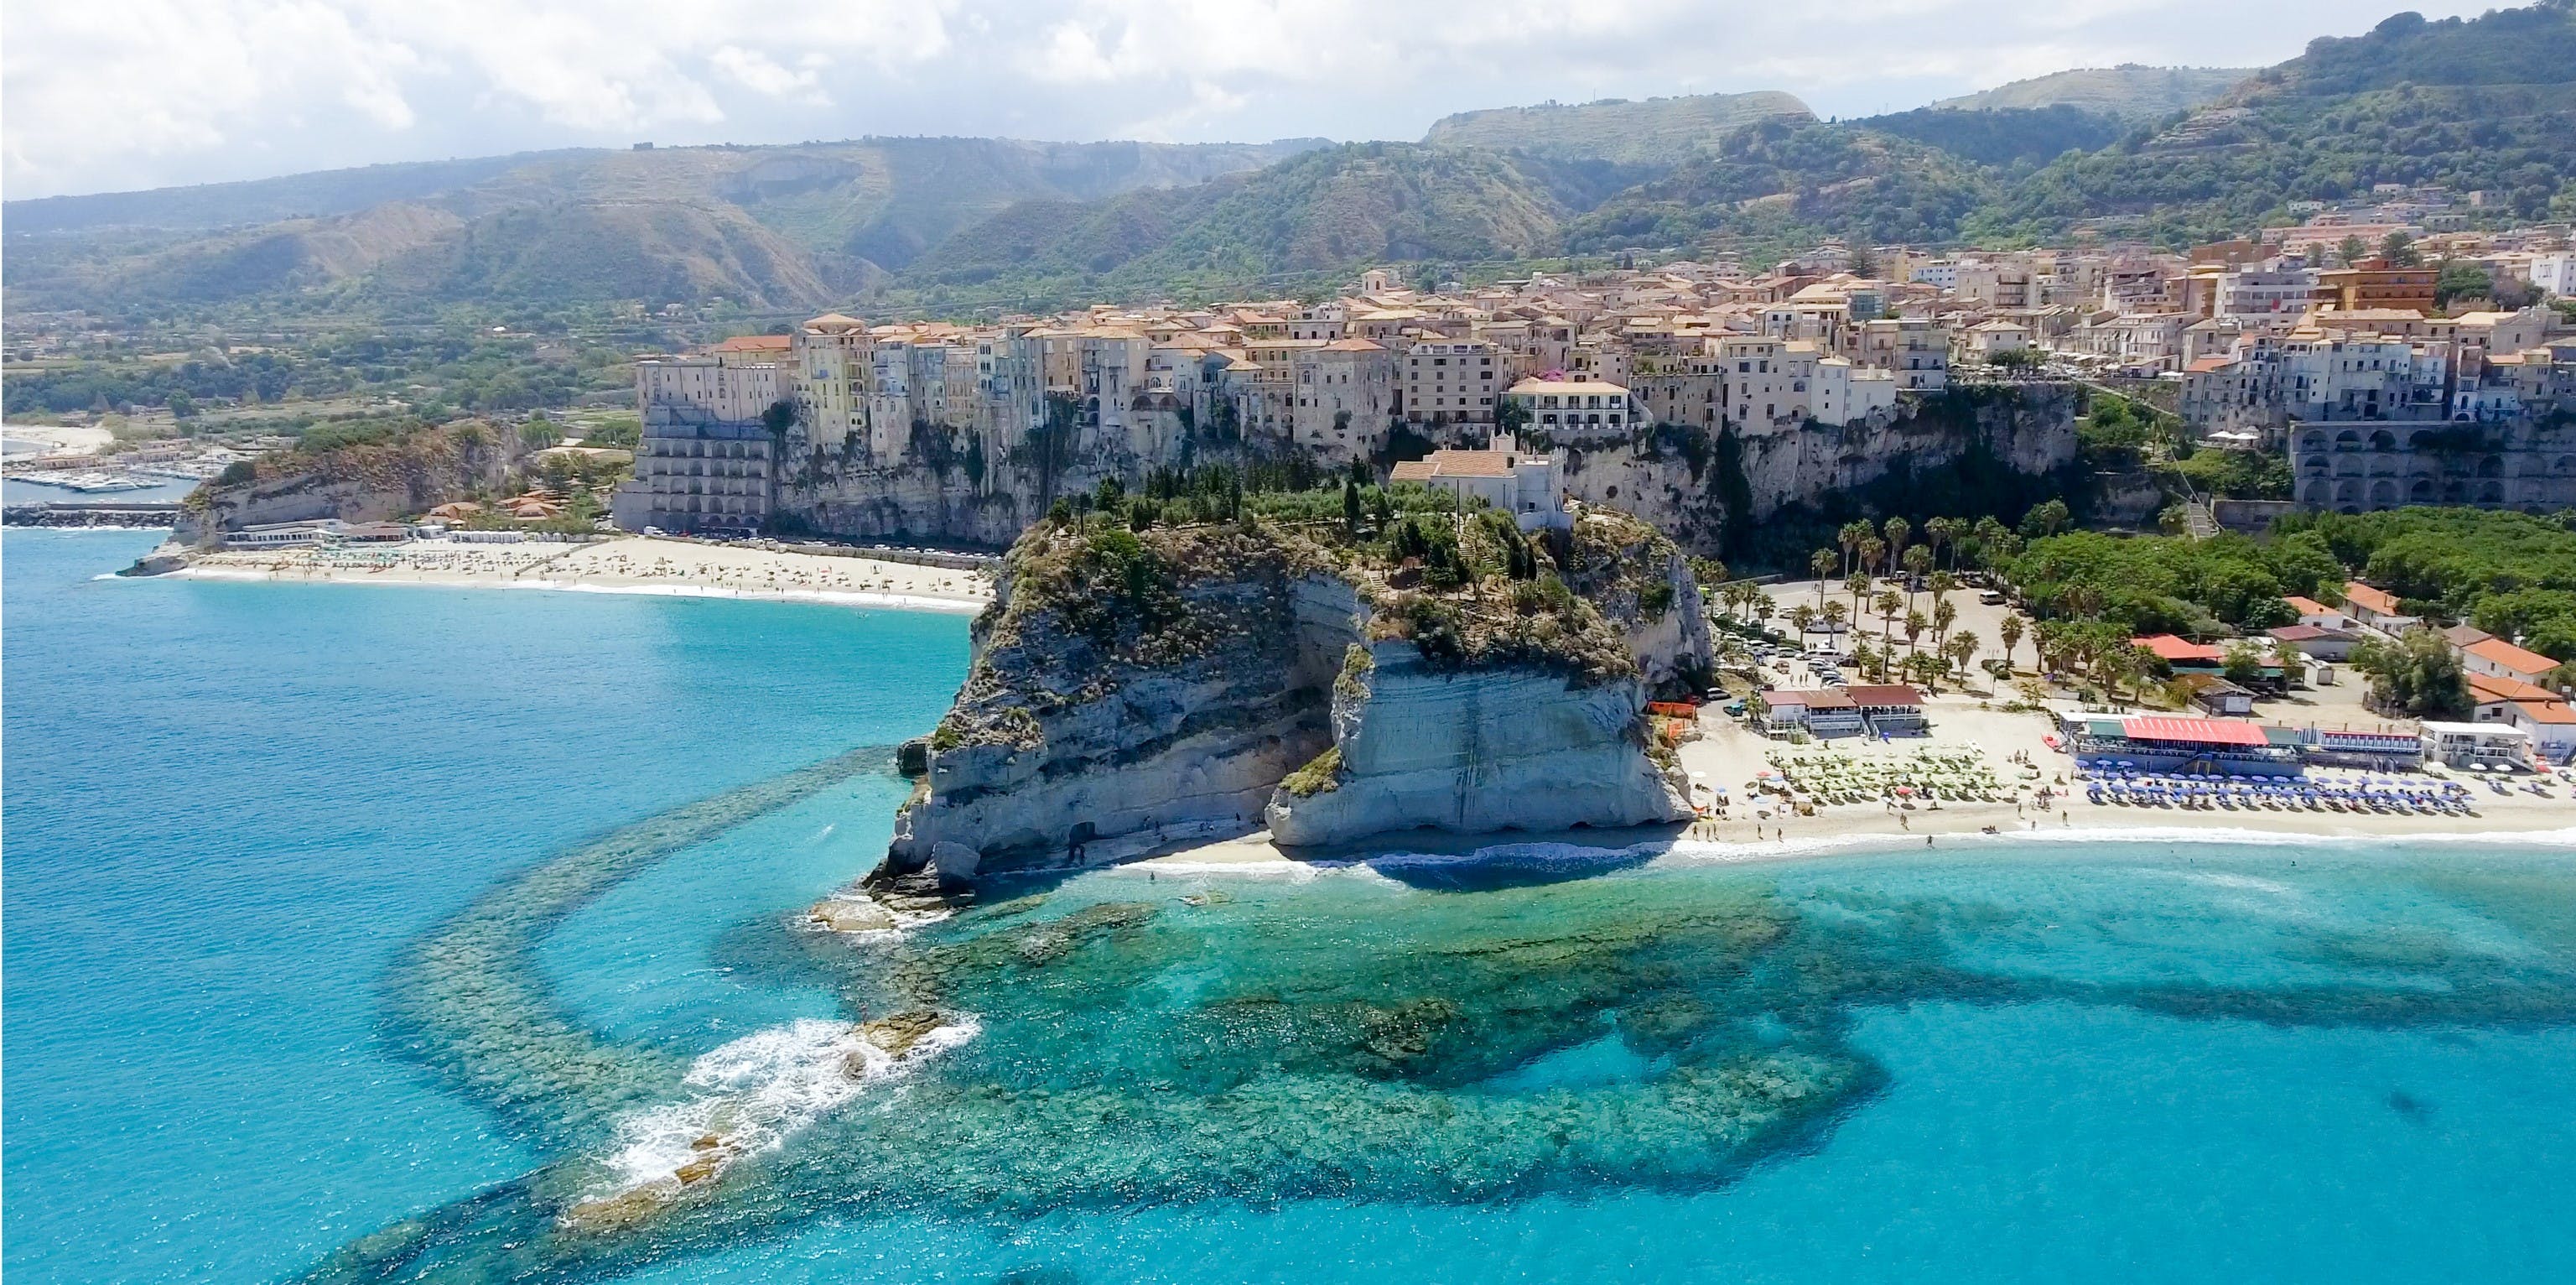 italy-calabria-tropea-houses-and-beach-view-from-the-sea-fotolia-2-jpg_header-245531.jpeg